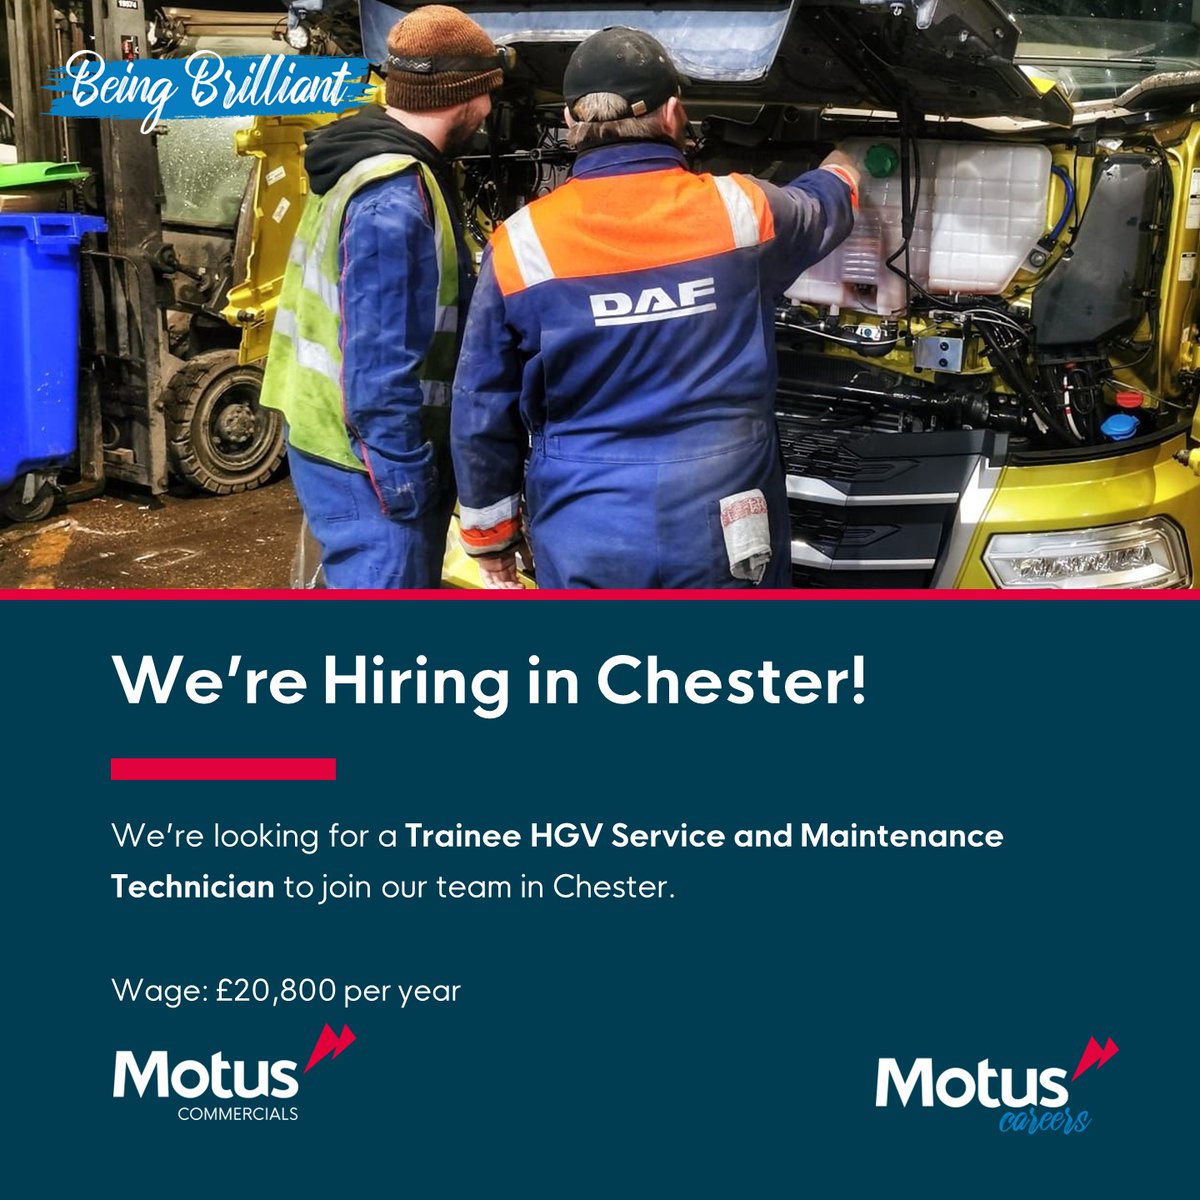 ⭐We're looking for a #Trainee HGV Service and Maintenance #Technician in #Chester⭐

APPLY NOW ➡️ indeedhi.re/3mPqfxr 

#Jobs #JobSearch #JobAlert #Hiring #Careers #Opportunity #ChesterJobs #Deeside #HGVTechnician #AutomotiveJobs  #MotusCommercials #MotusCommercialsCareers